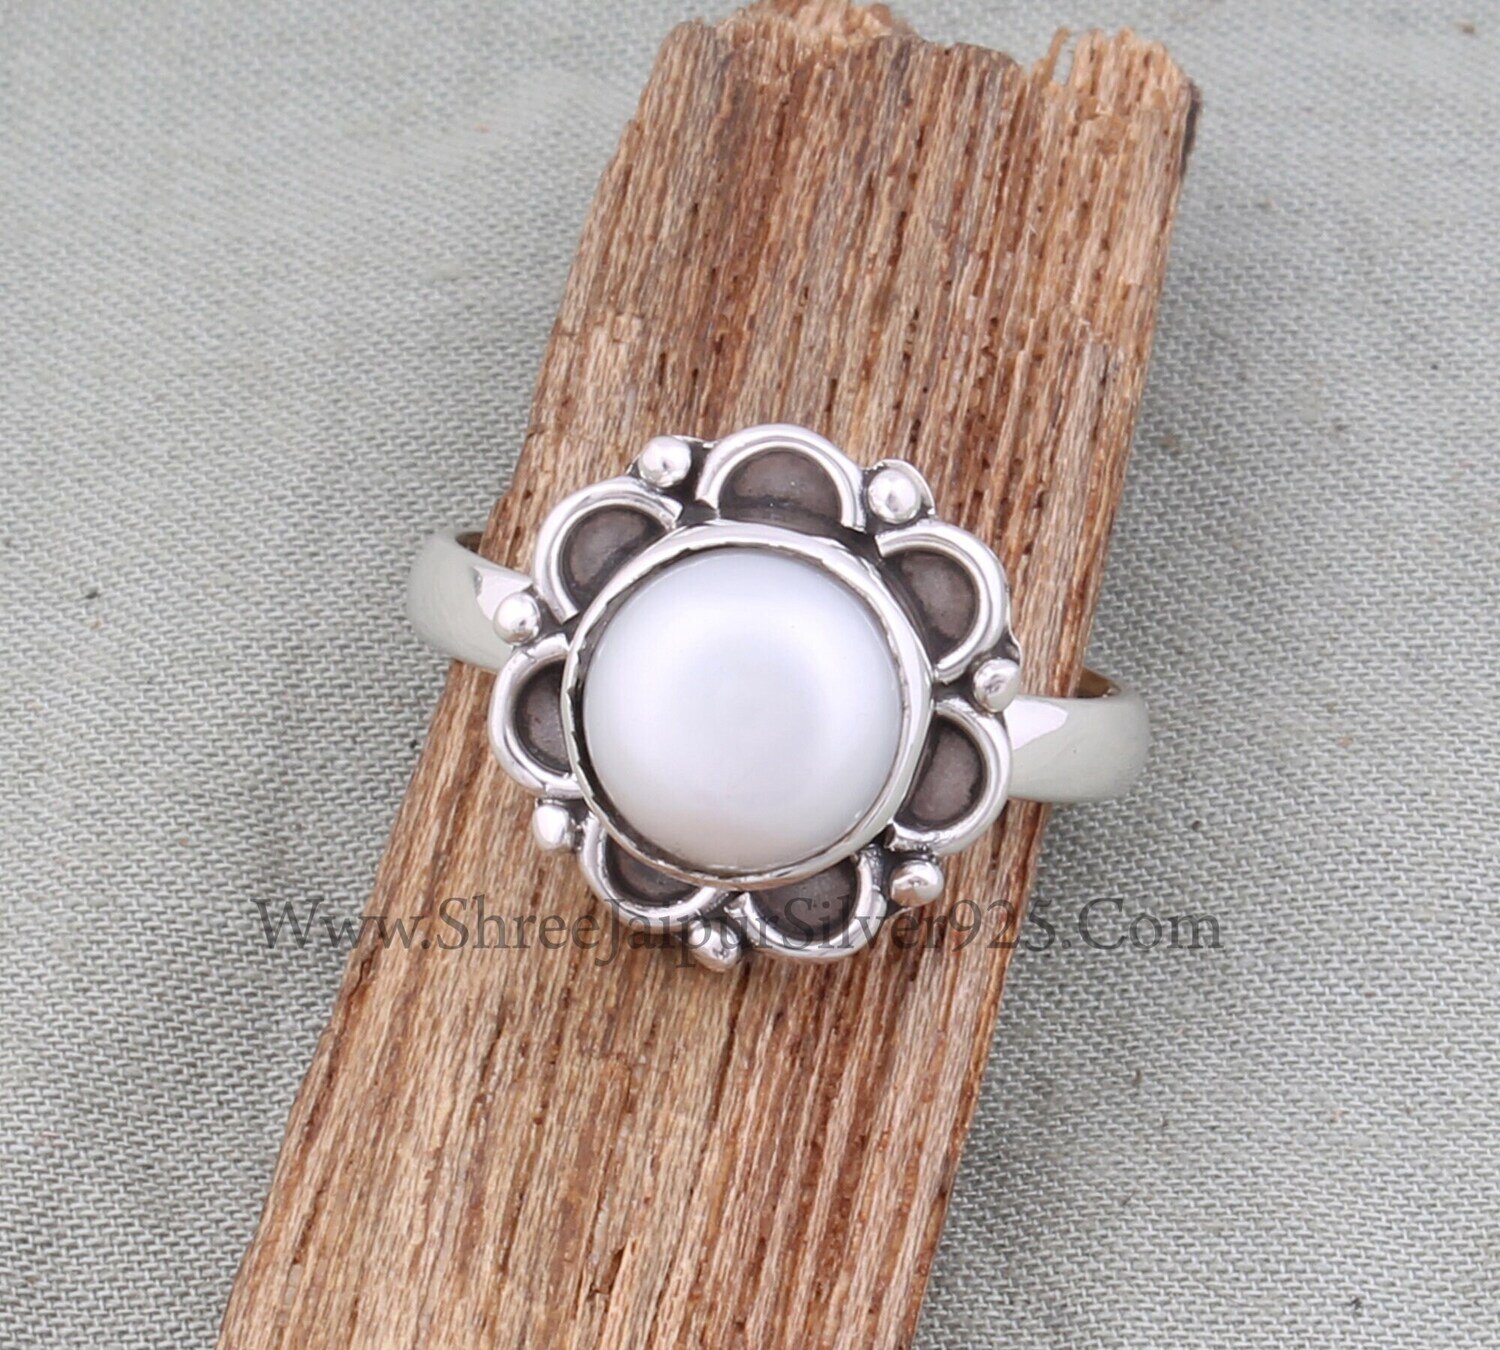 Natural Pearl Solid 925 Sterling Silver Ring For Women, Handmade Engraved Silver Flower Fancy Round Ring Gifts For Her Bridesmaid Wedding